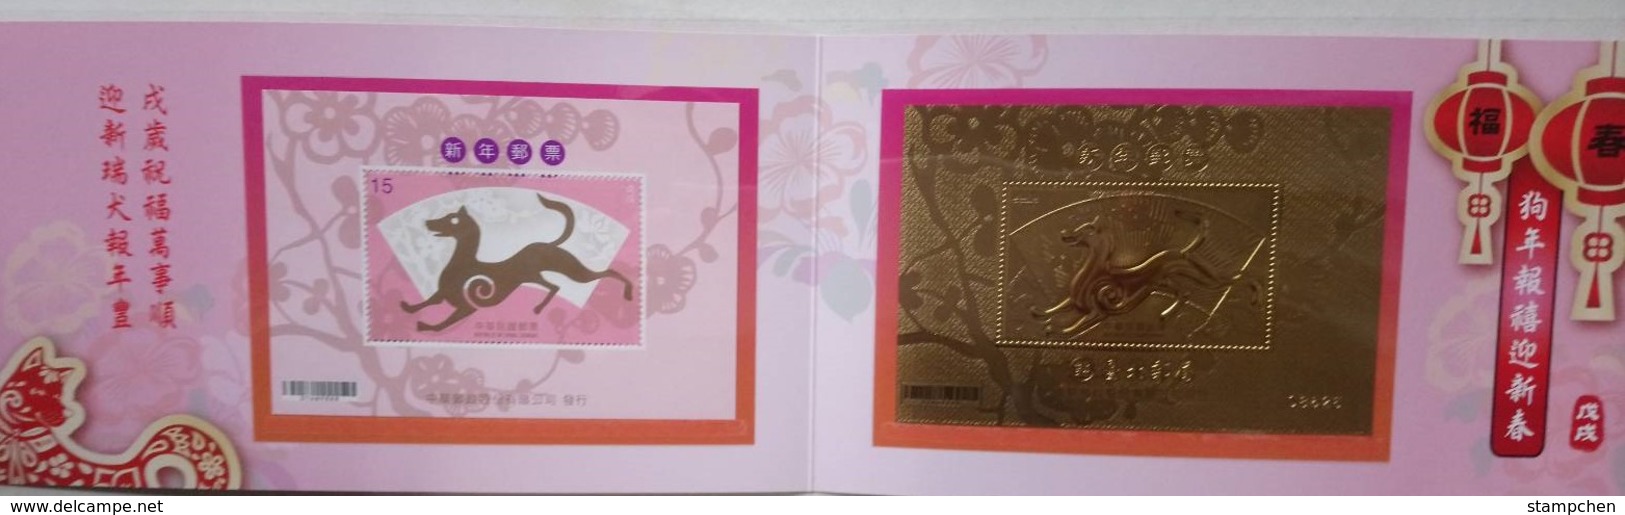 Gold Foil 2017 Chinese New Year Zodiac Stamp S/s-Dog (Taipei) Unusual 2018 - Chinese New Year